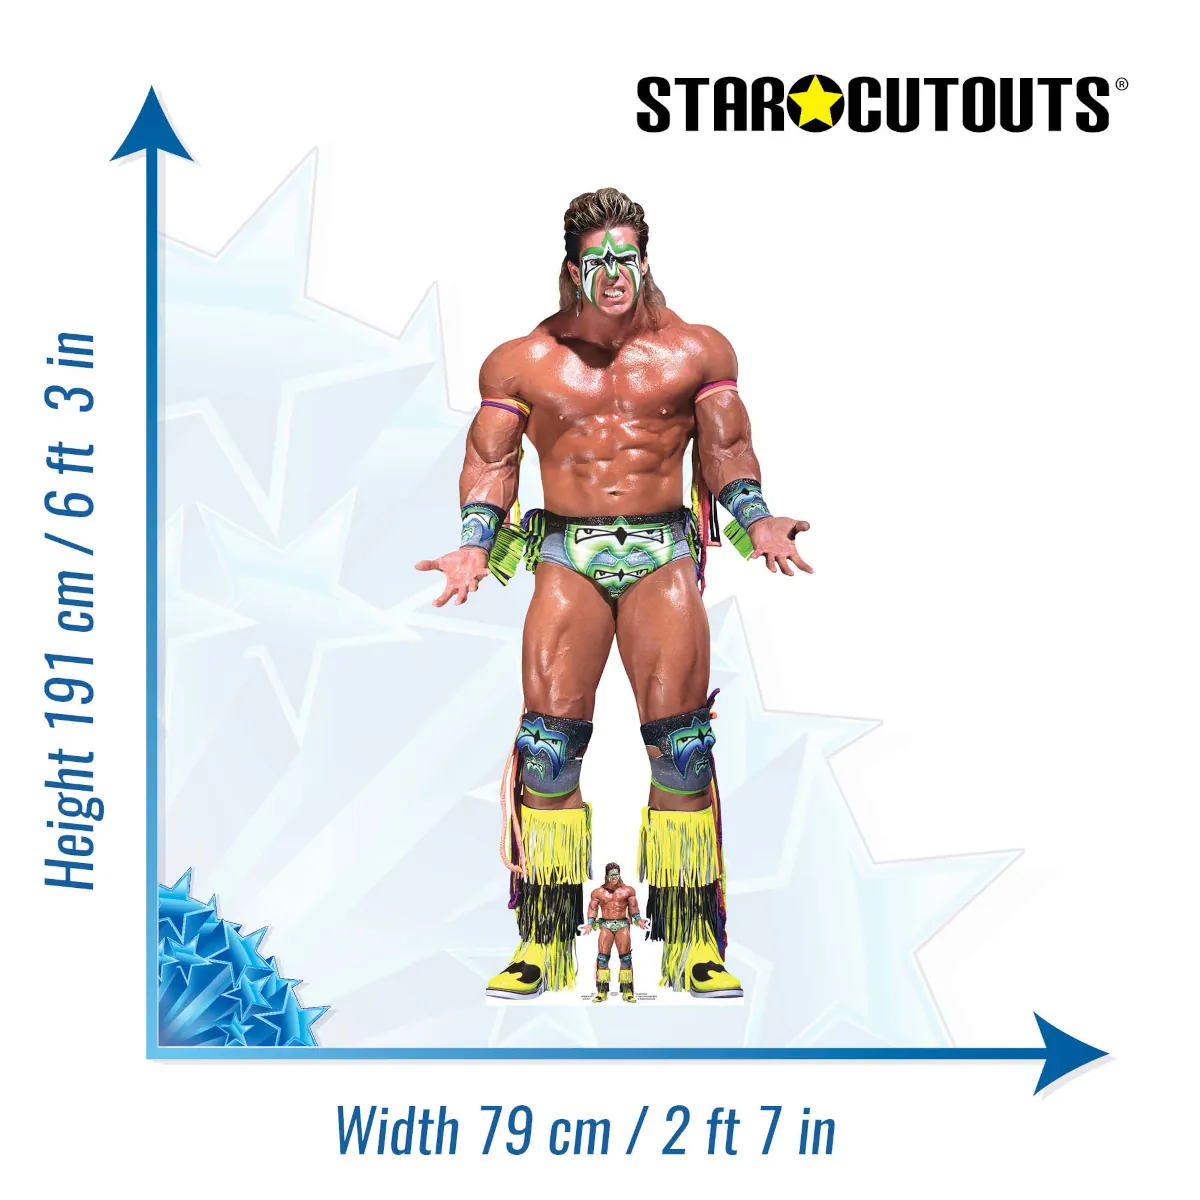 SC4190 The Ultimate Warrior (WWE) Official Lifesize + Mini Cardboard Cutout Standee Size